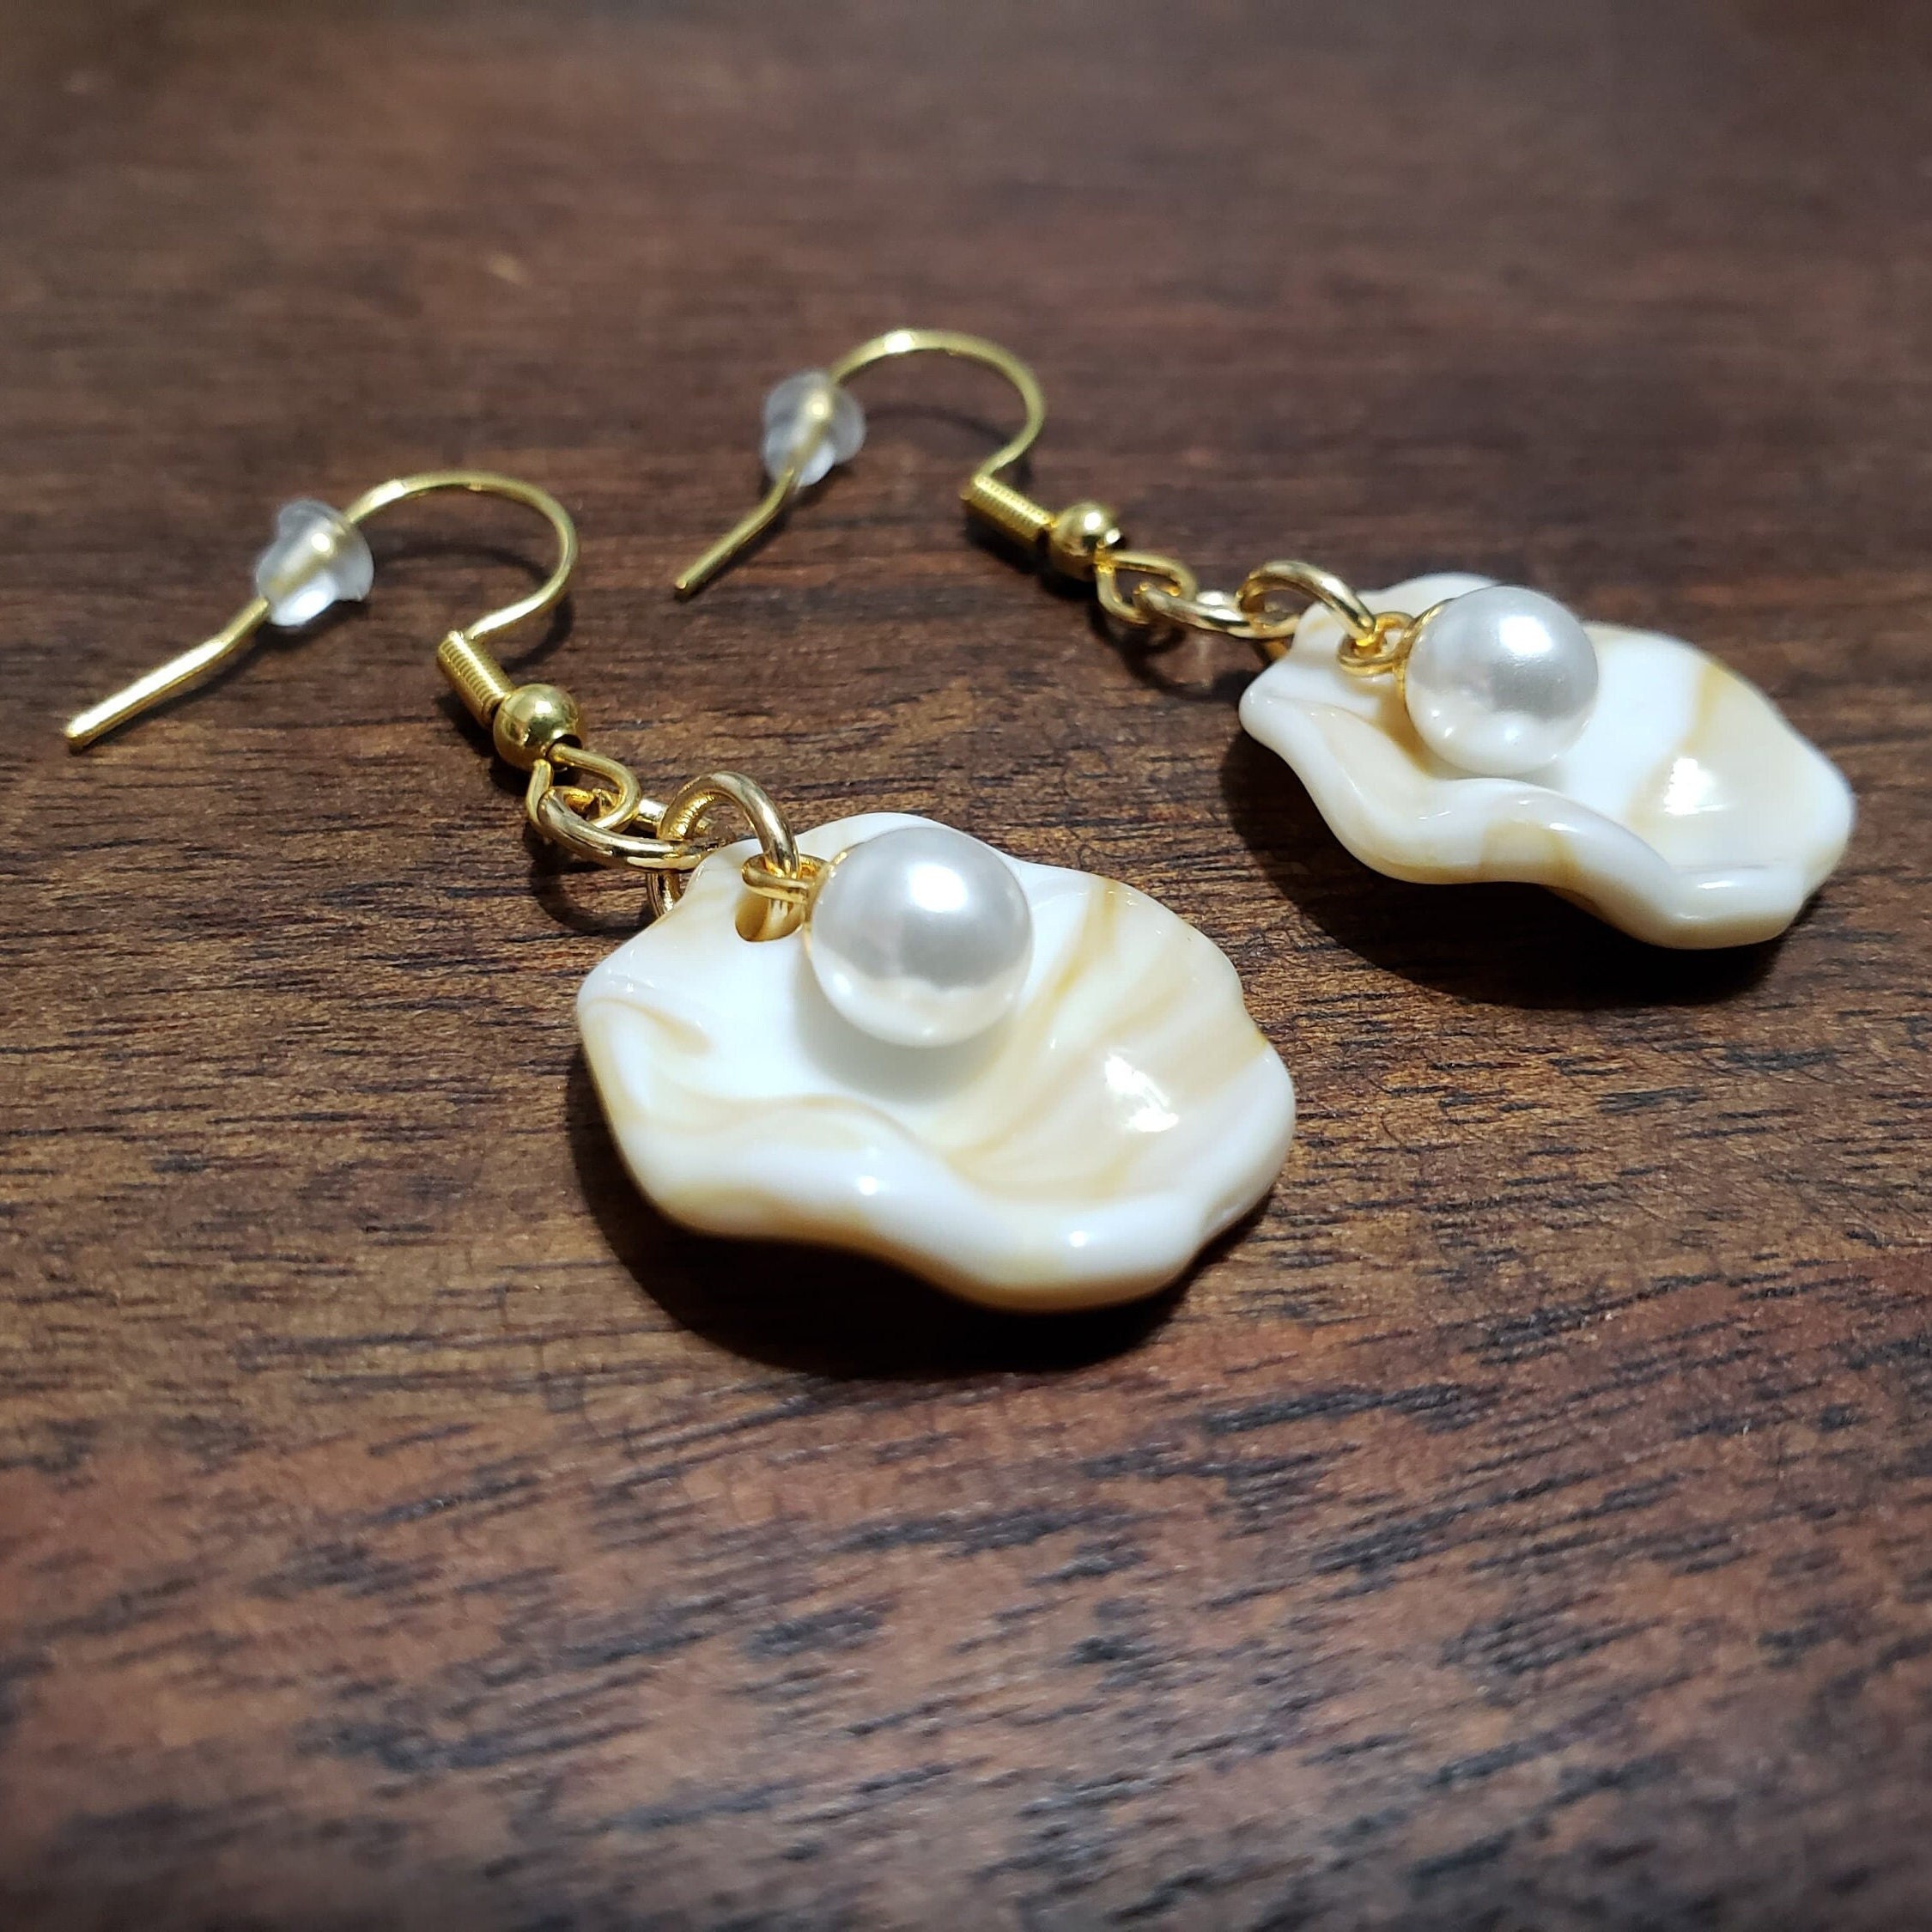 Large Pearl Earrings | Pearl Drop Earrings | Large Gold Ball Earrings with Allergy-Free Clasp (20mm), Pink